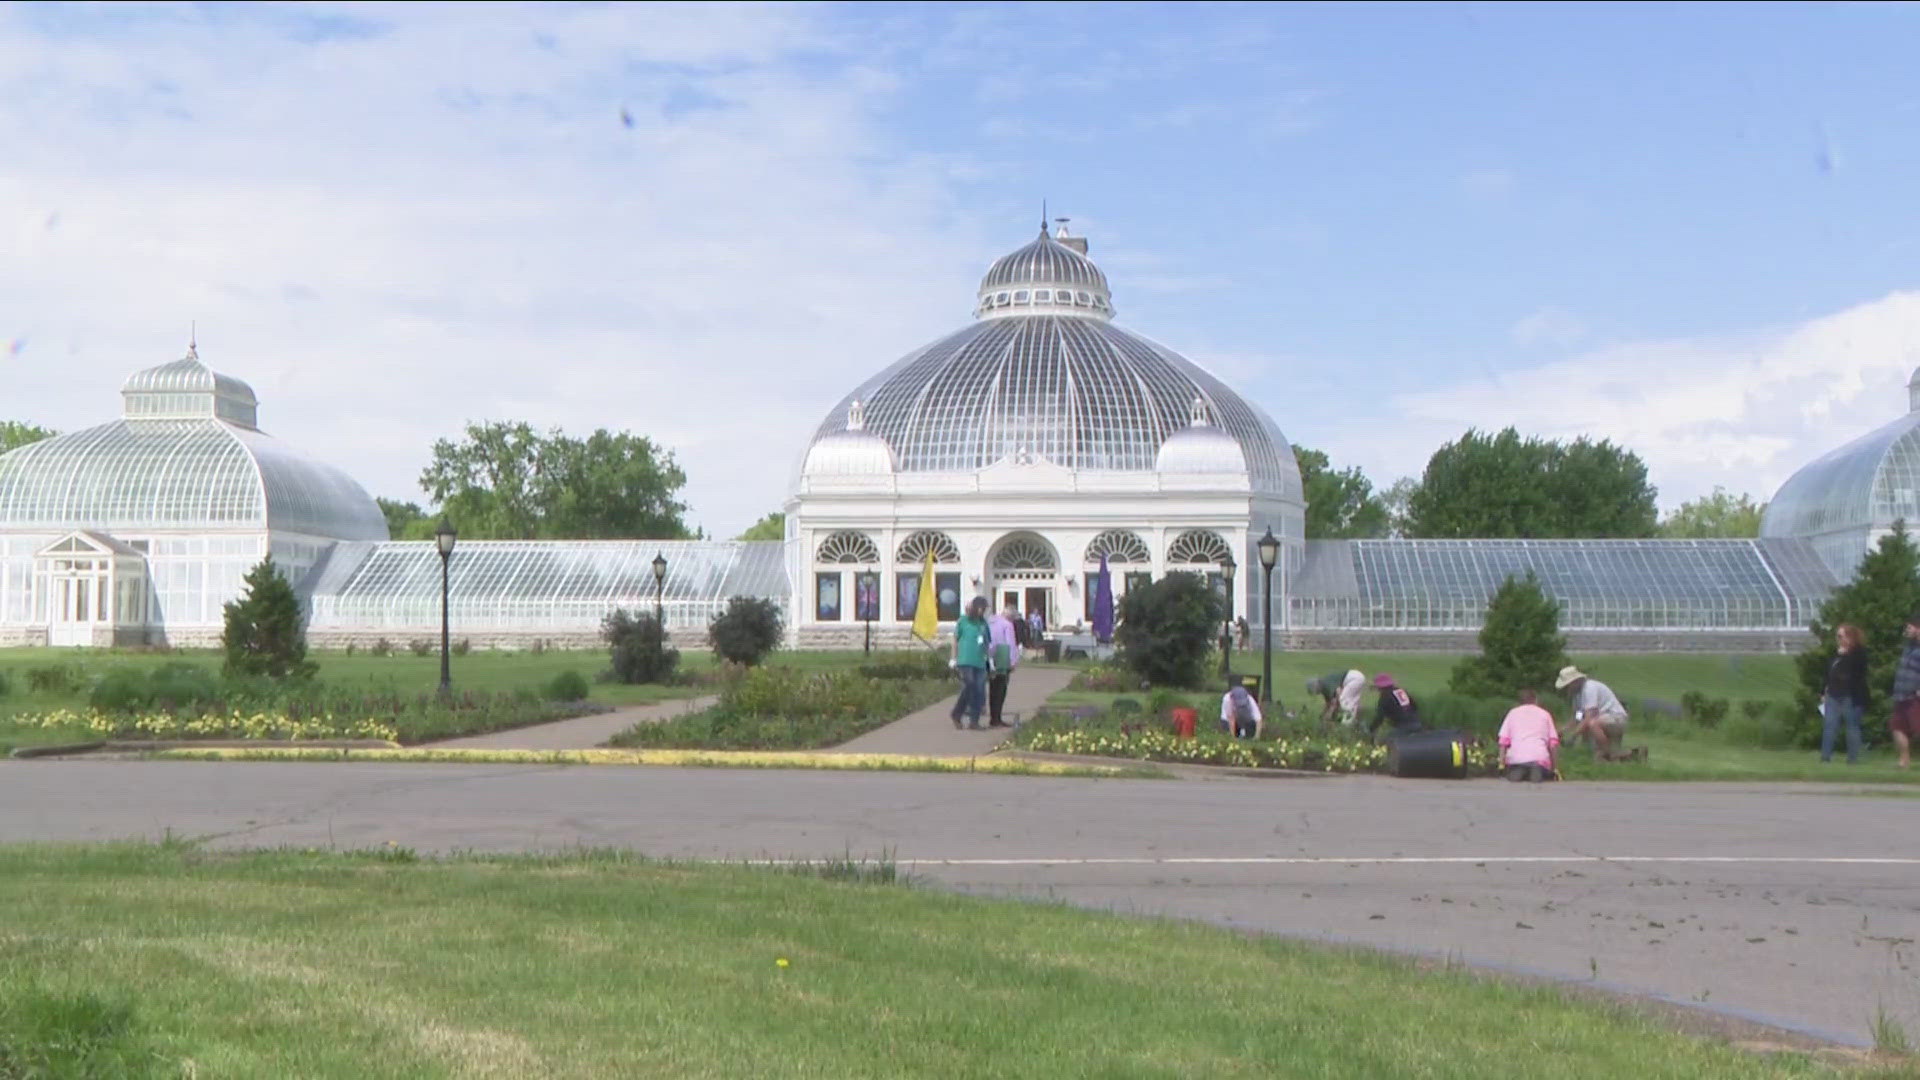 Next time you visit the Buffalo and Erie County Botanical Gardens, things will be even more colorful than usual